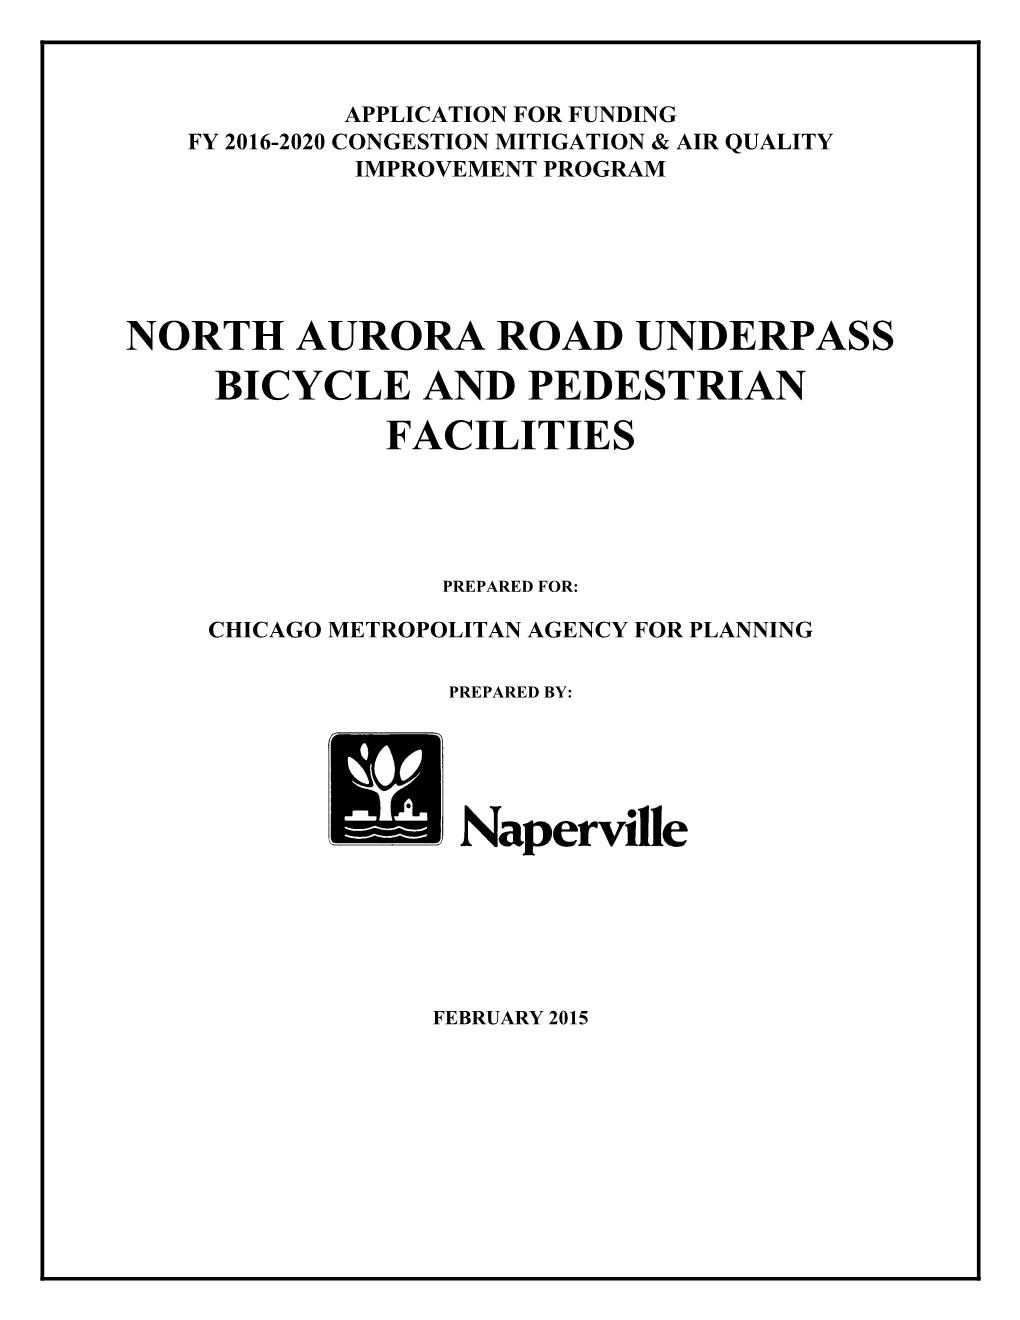 North Aurora Road Underpass Bicycle and Pedestrian Facilities